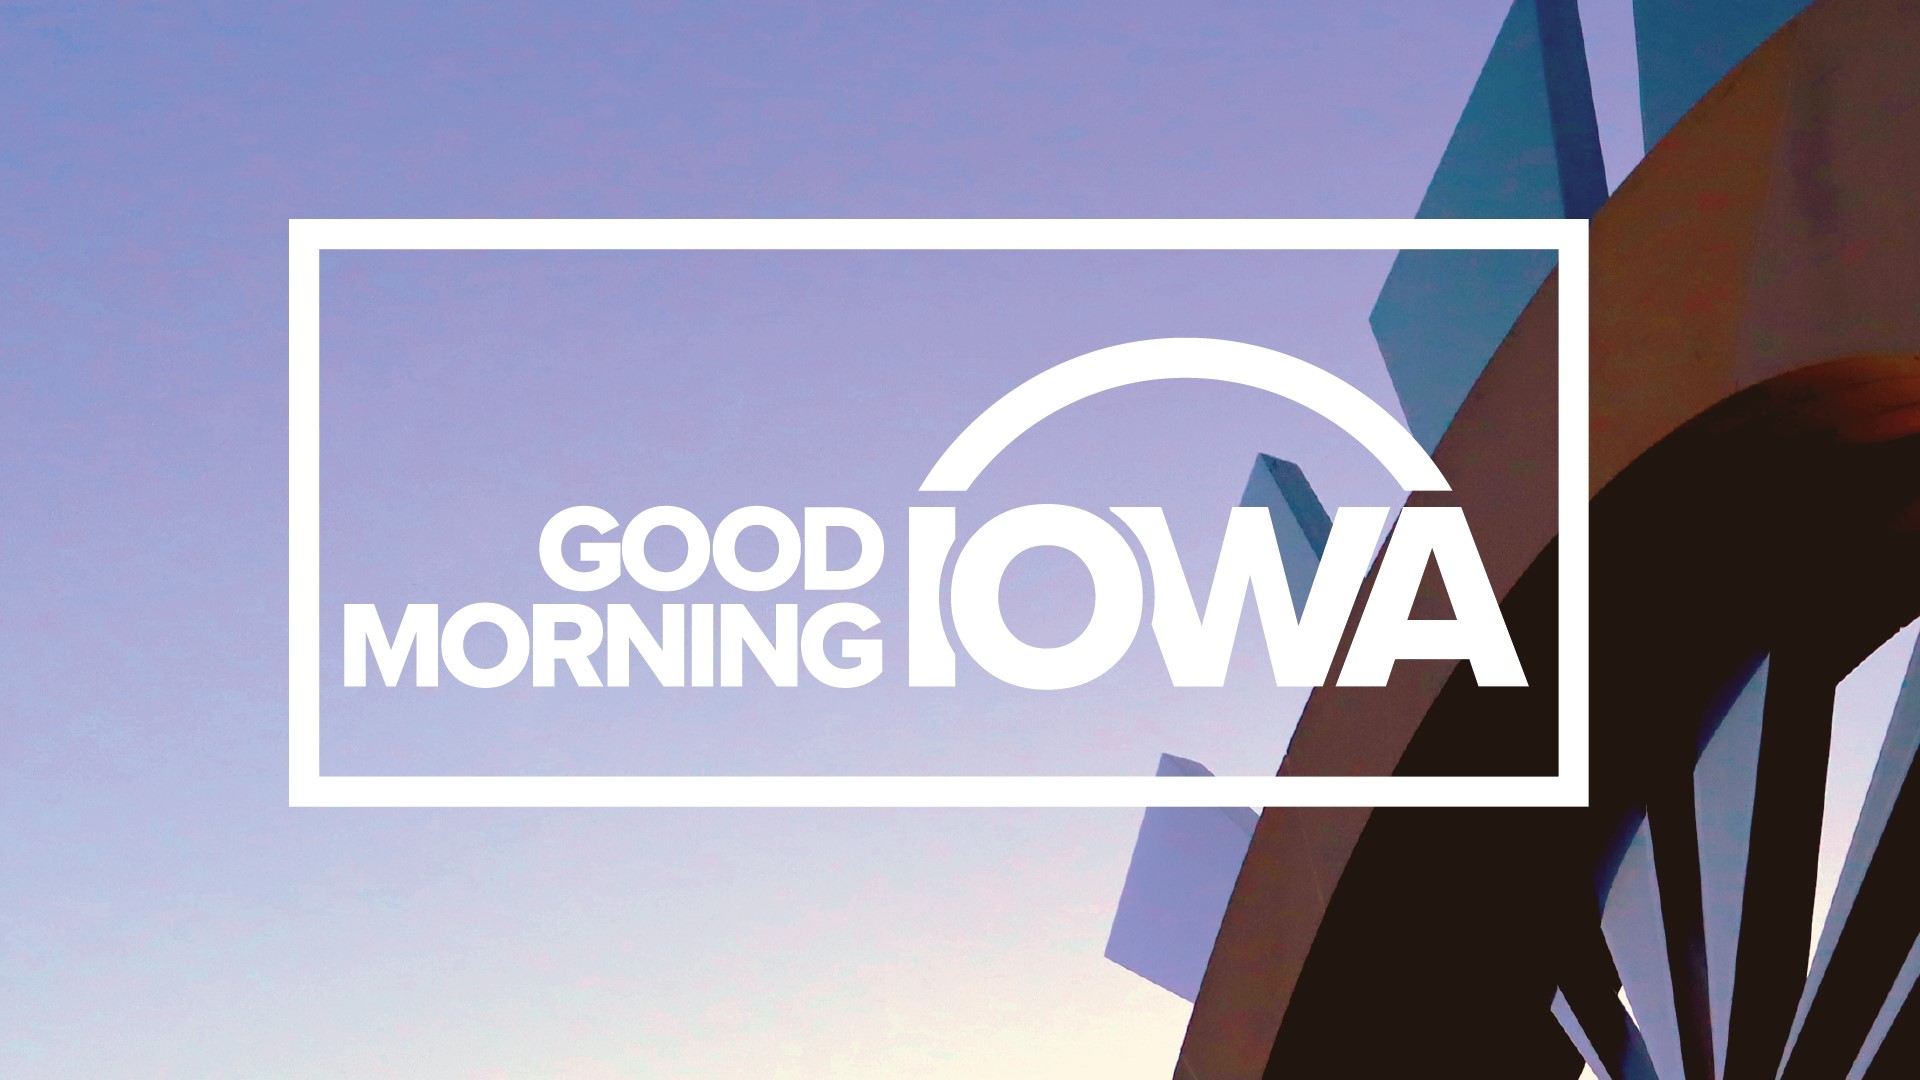 Good Morning Iowa gives you the latest local news and weather, plus headlines and news updates from across the country.